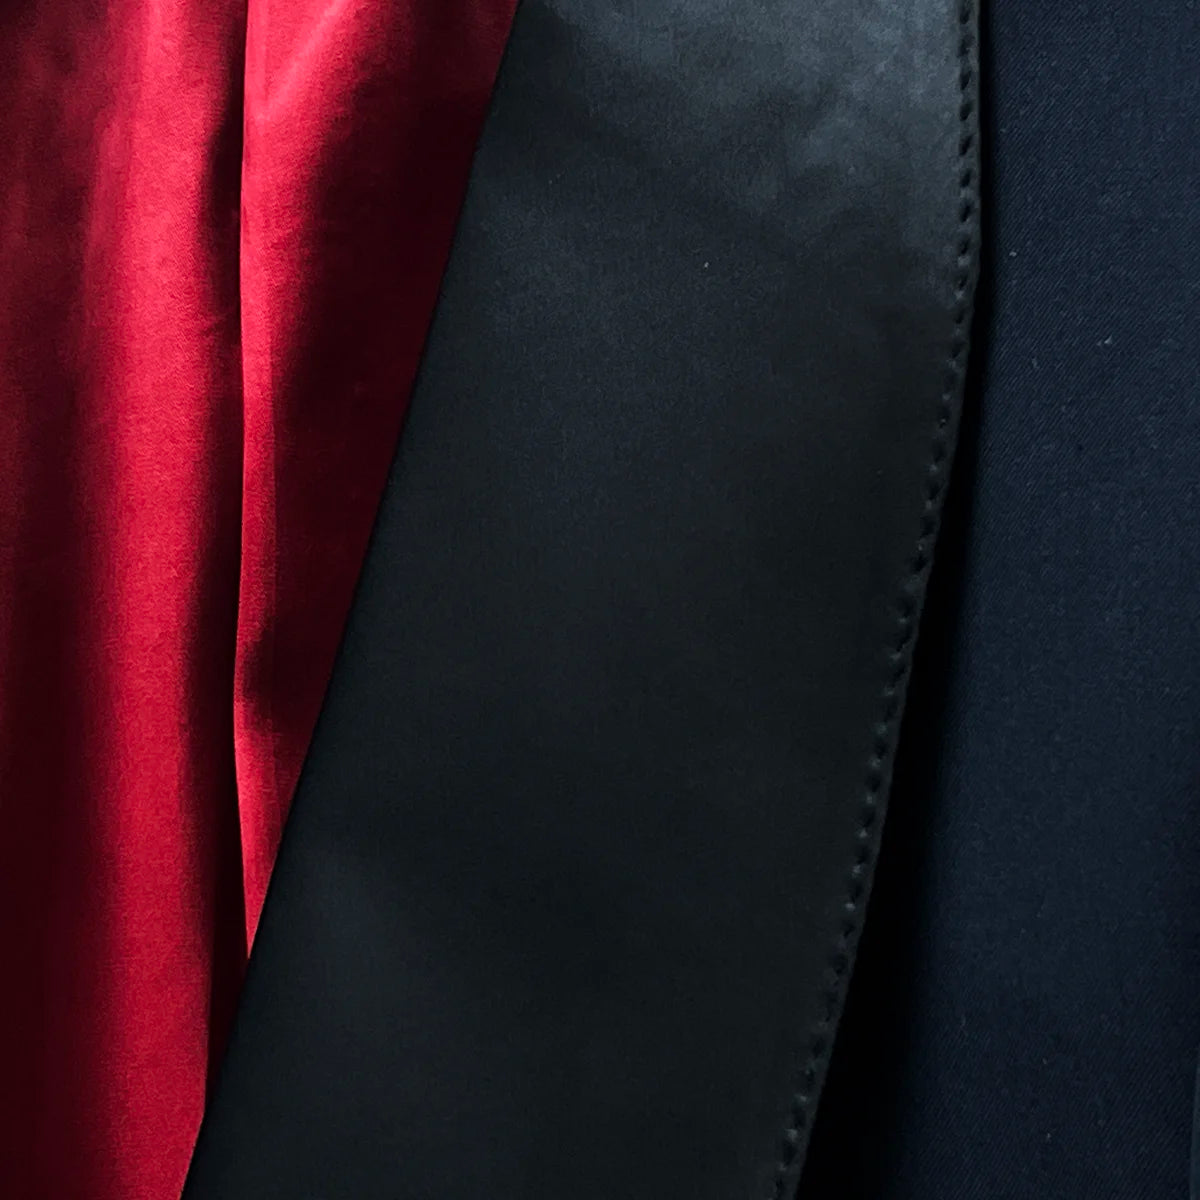 Close-up of the deep shawl lapel with black satin, emphasizing the tuxedo’s luxurious features.